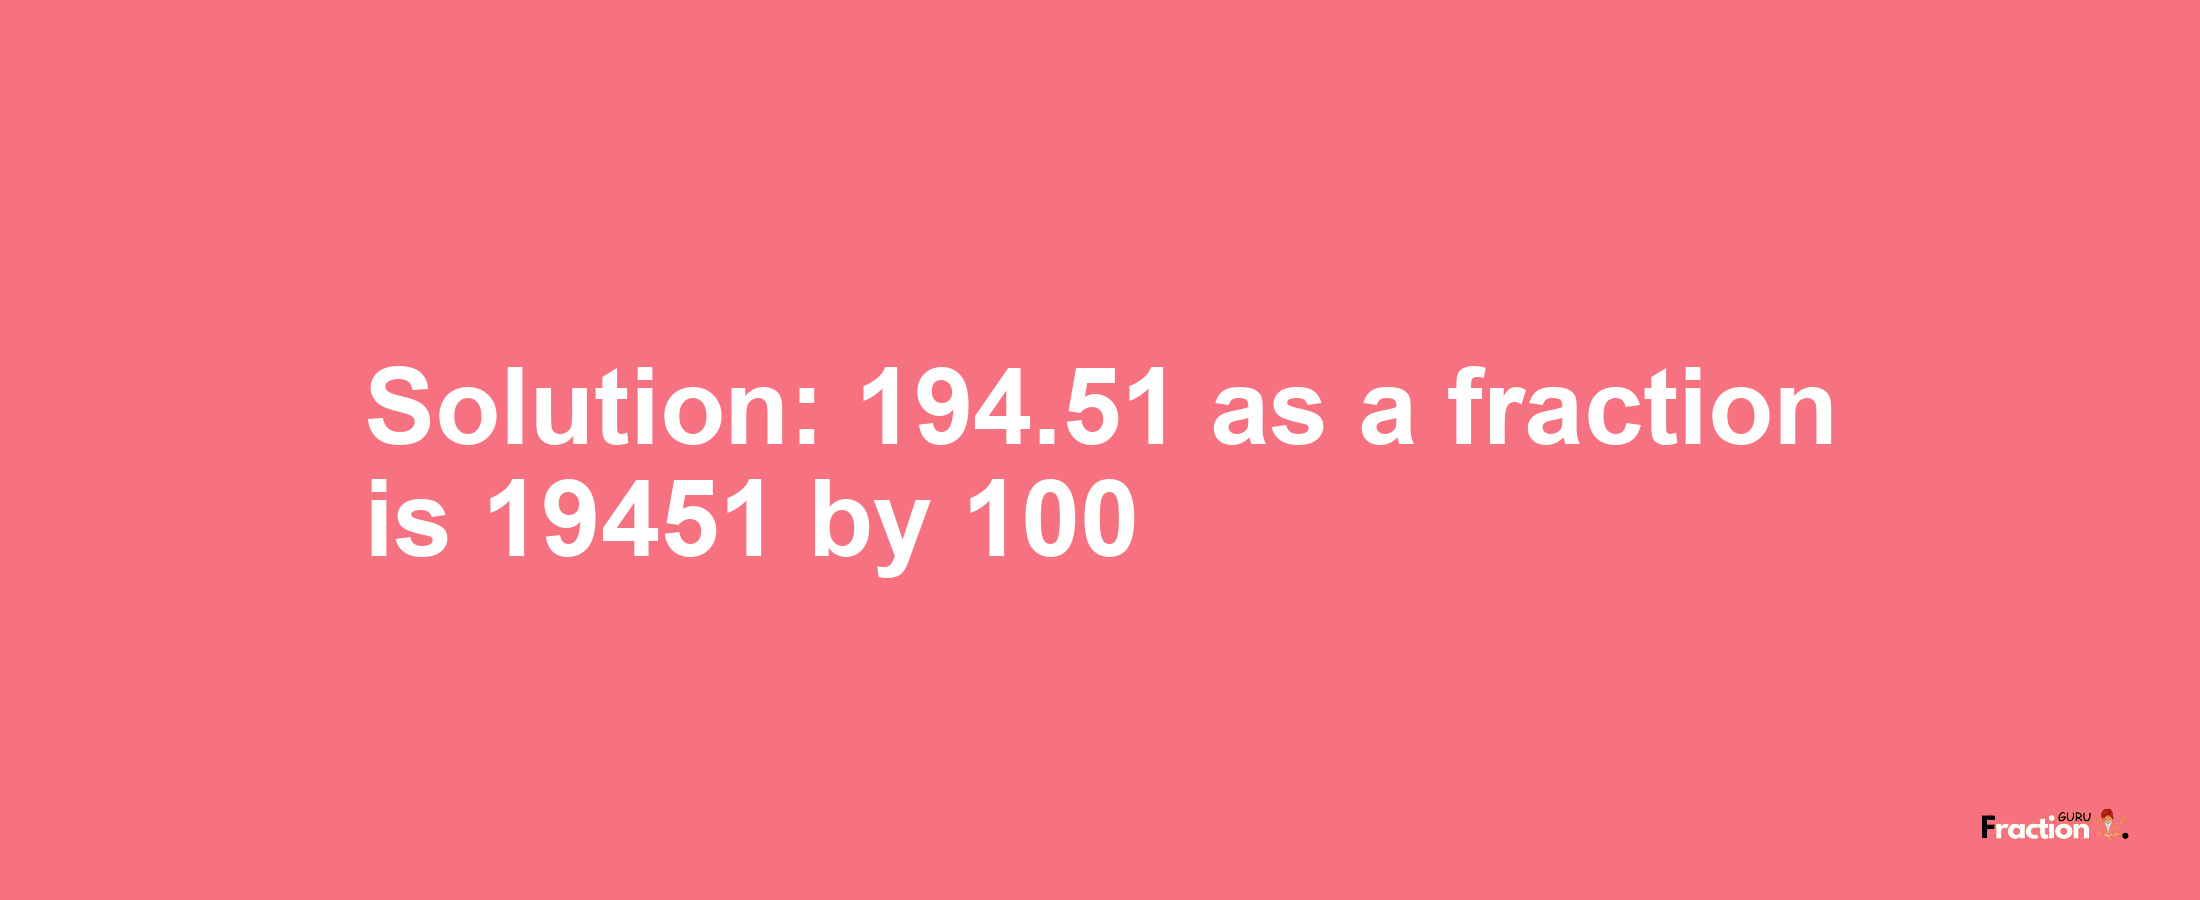 Solution:194.51 as a fraction is 19451/100